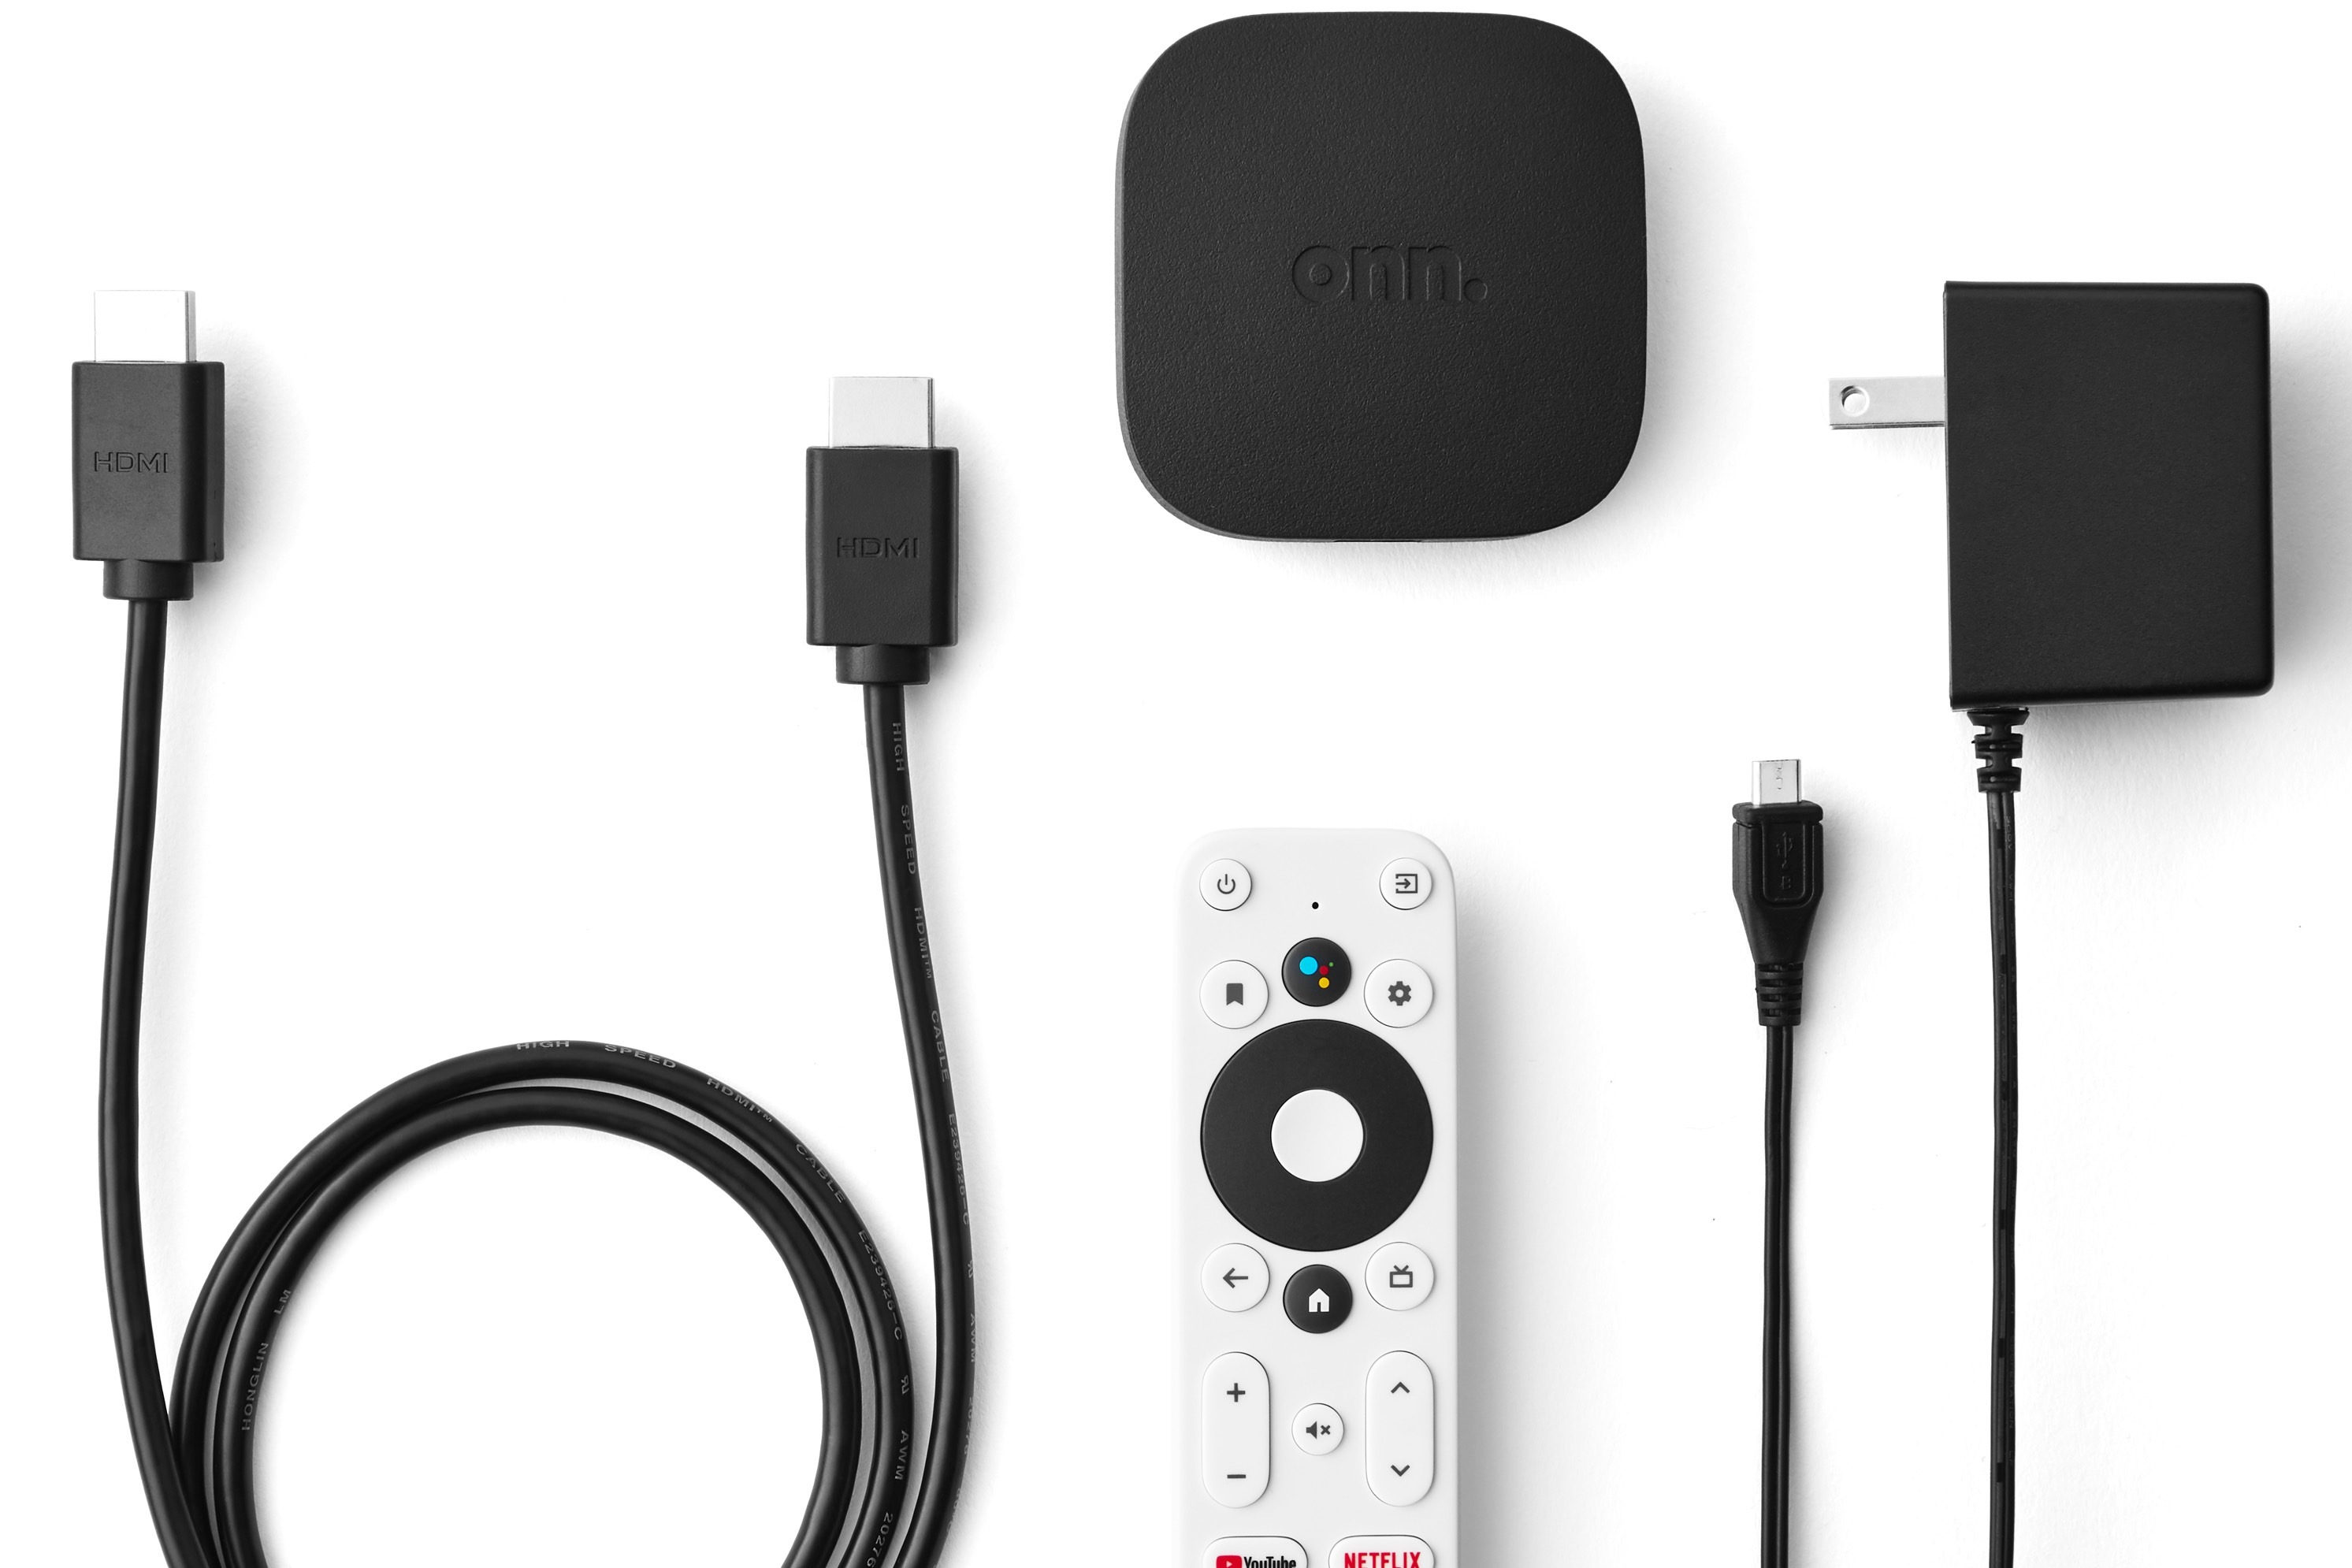 Walmart onn. Android TV streaming device